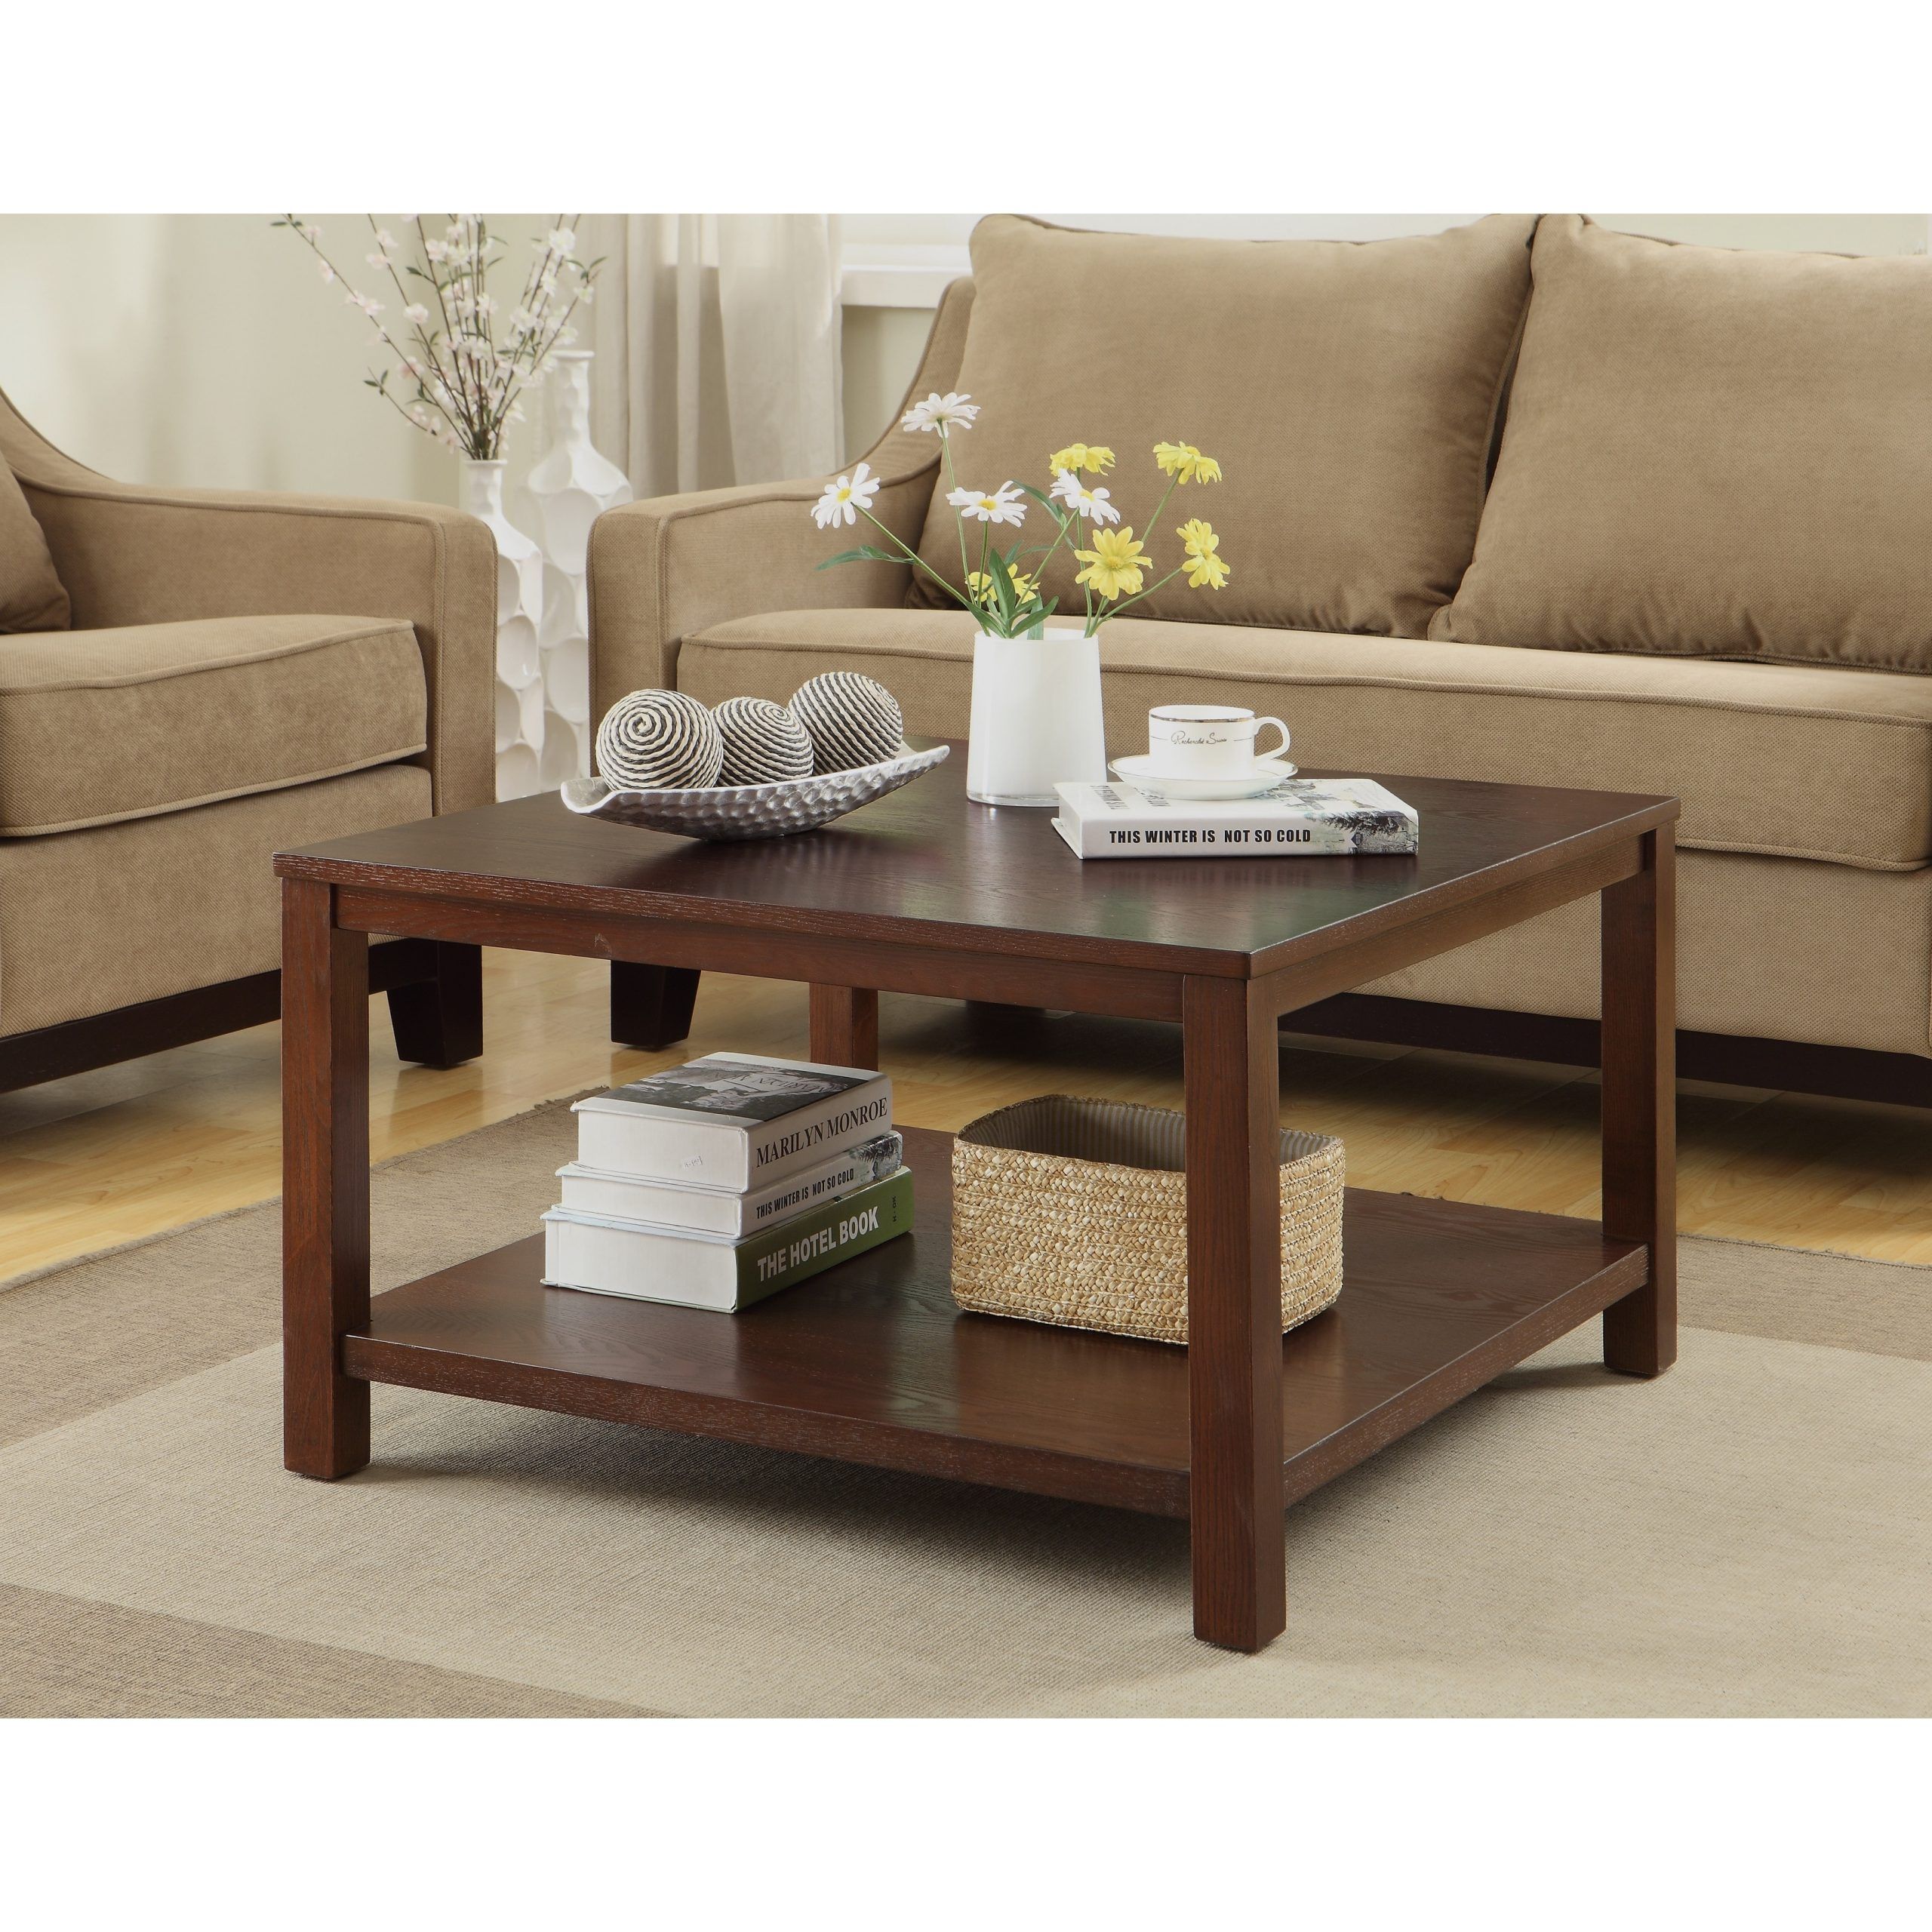 Square Coffee Table With Dual Shelves Solid Wood Legs & Wood | Ebay With Coffee Tables With Solid Legs (Gallery 10 of 20)